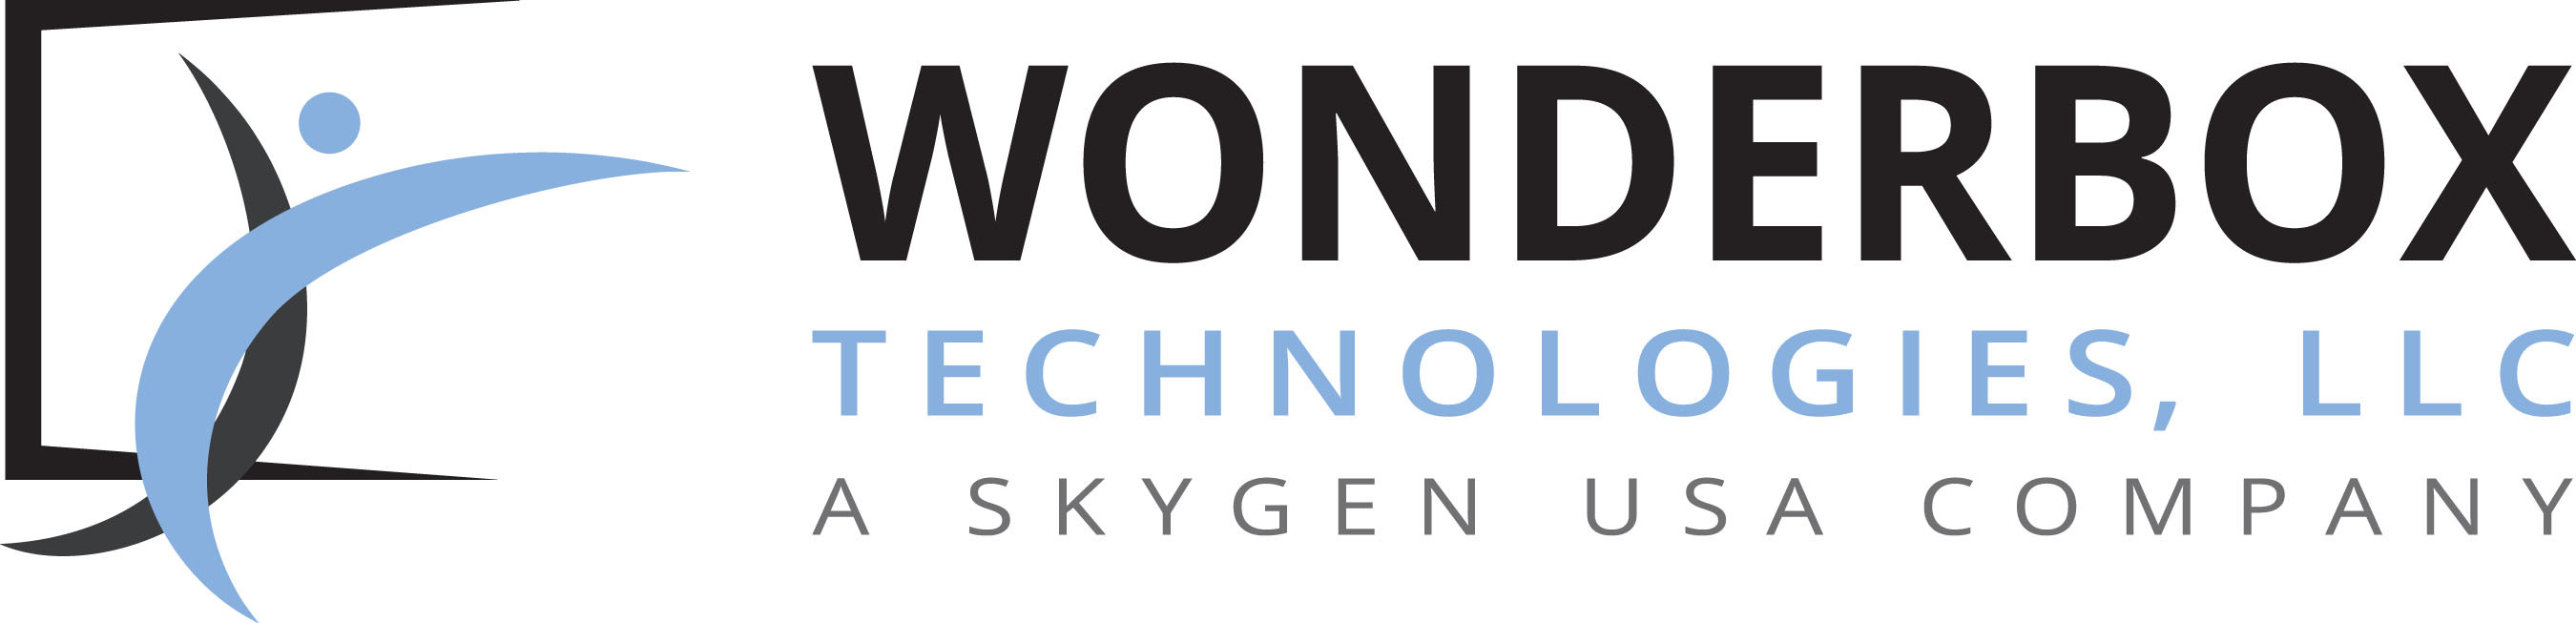 Wonderbox Technologies, part of the SKYGEN USA family of companies, is a distinguished, agile software company focused on building next-generation technology for the specialty payer market. This technology enables healthcare payers to remain at the forefront of benefit management by using one of the world's most innovative and flexible technology platforms to dramatically improve automation, achieve compliance and reduce the cost of delivering healthcare benefits.